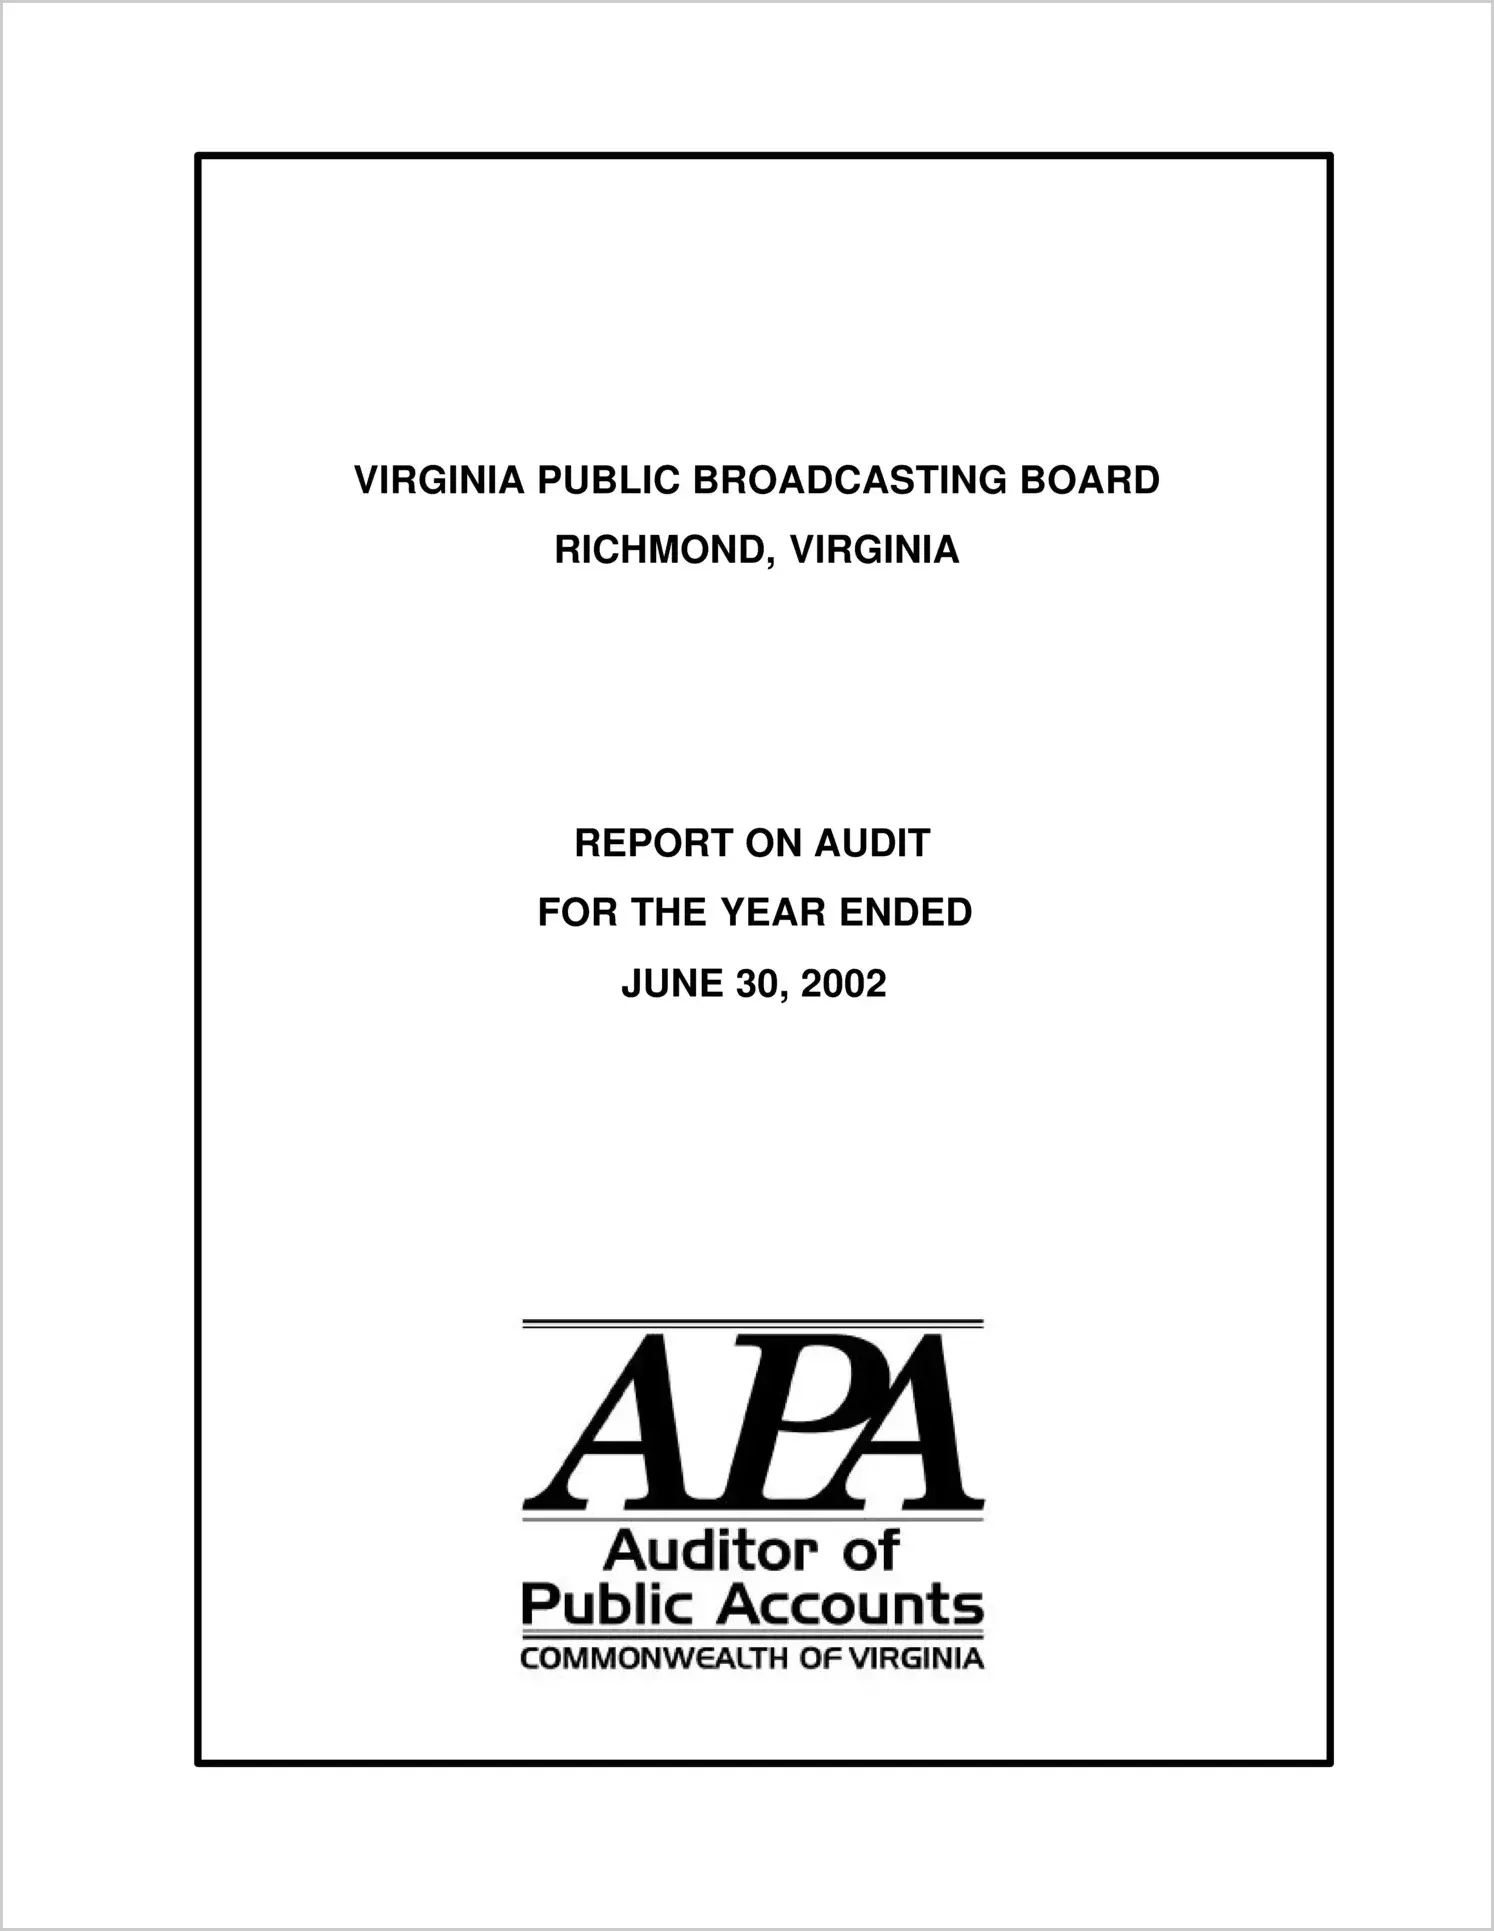 Virginia Public Broadcasting Board for the year ended June 30, 2002